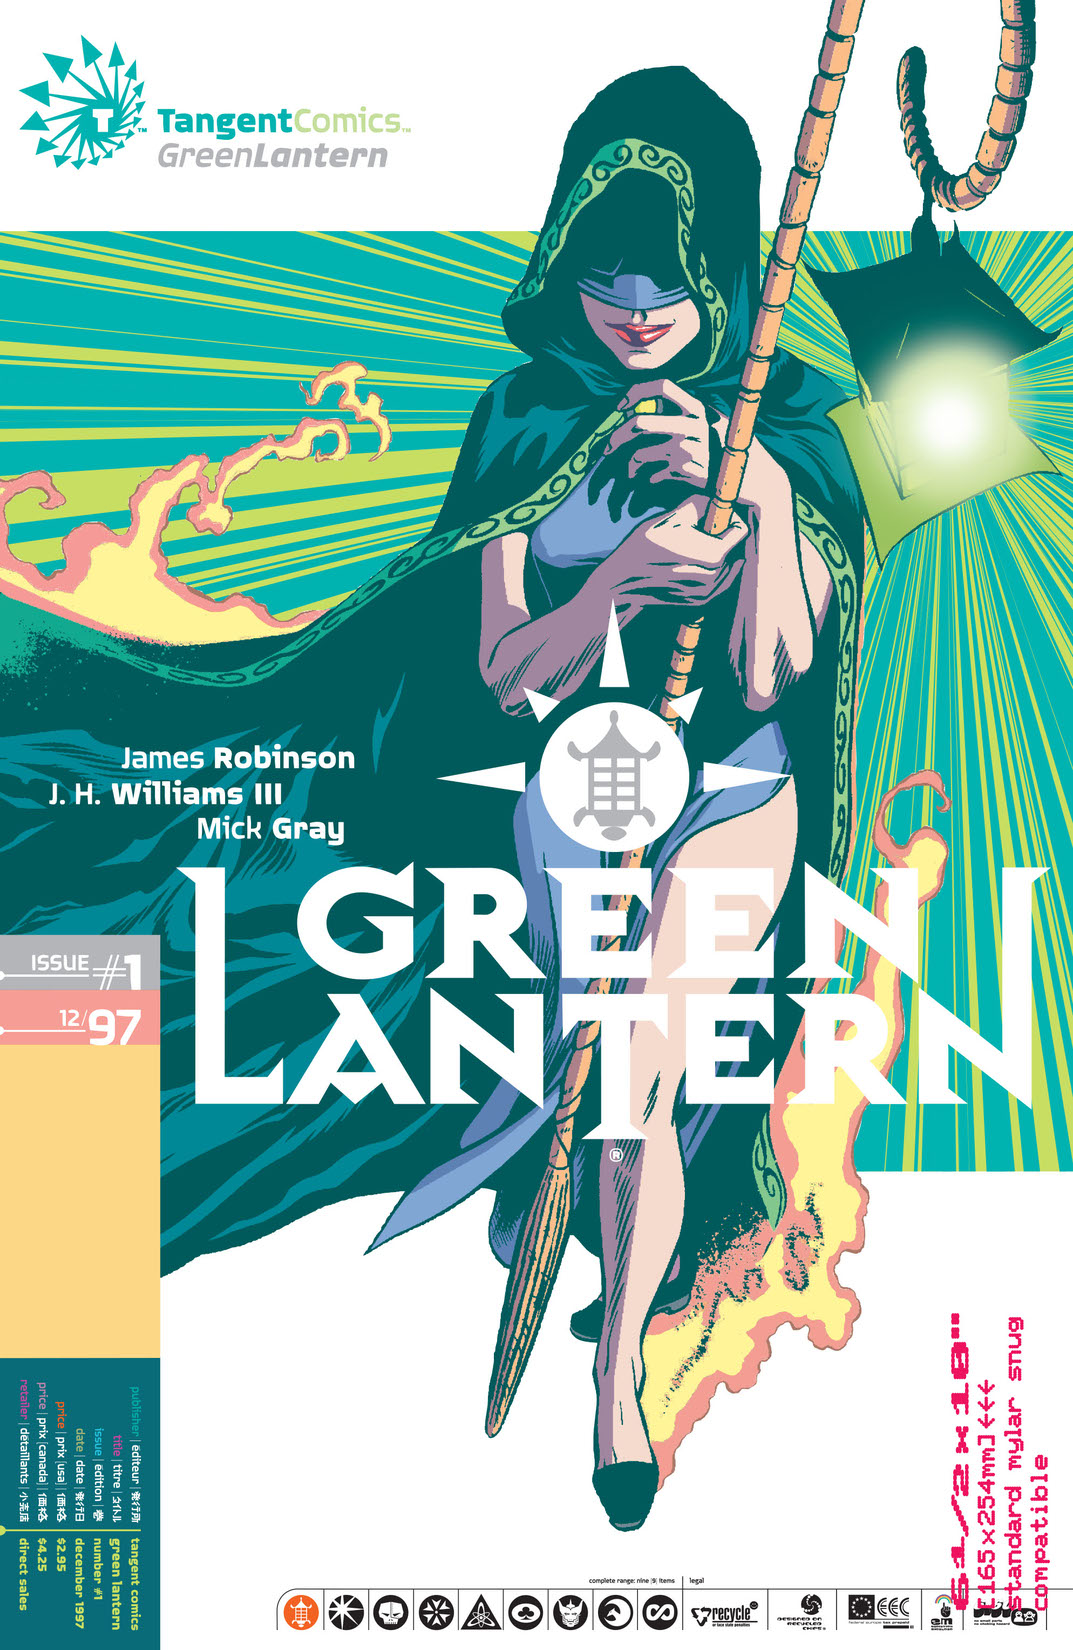 Green Lantern #1 preview images